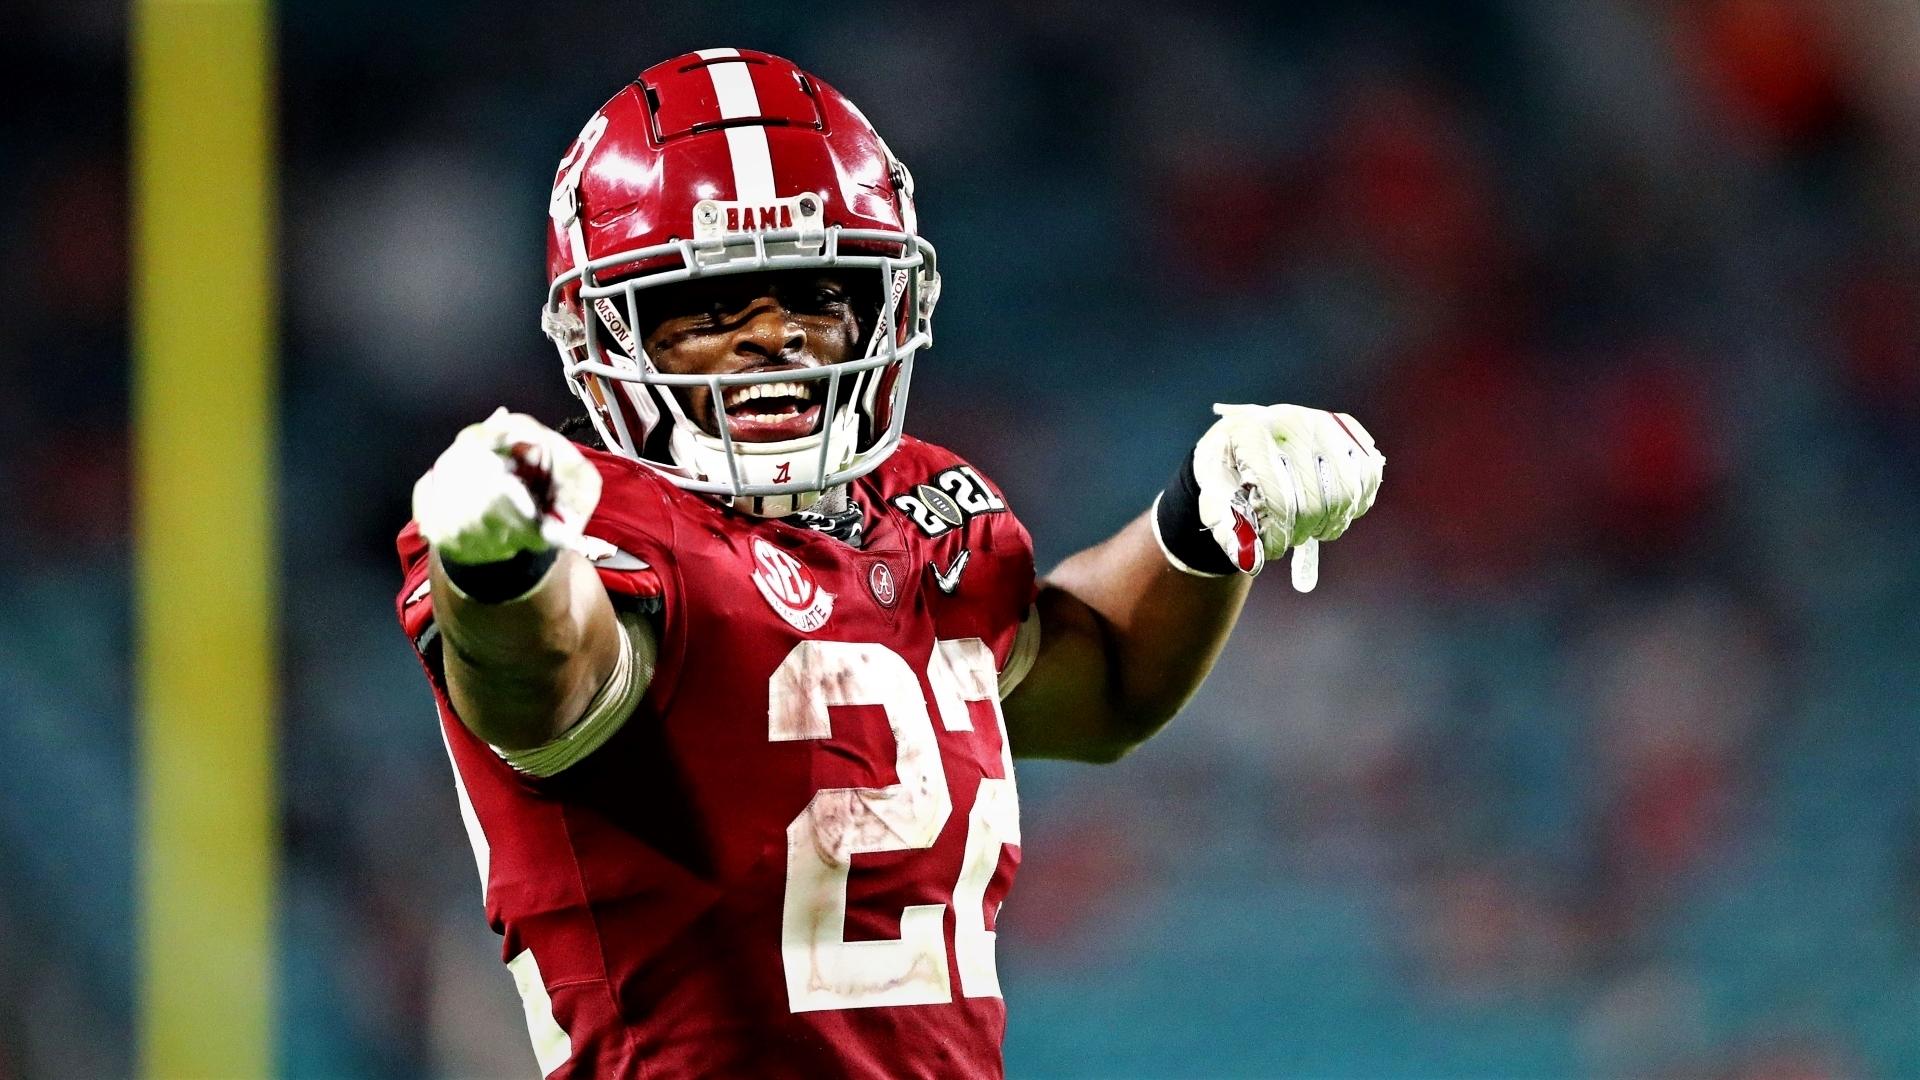 Alabama Crimson Tide running back Najee Harris (22) celebrates during the third quarter against the Ohio State Buckeyes in the 2021 College Football Playoff National Championship Game. Mandatory Credit: Mark J. Rebilas-USA TODAY Sports / © Mark J. Rebilas-USA TODAY Sports